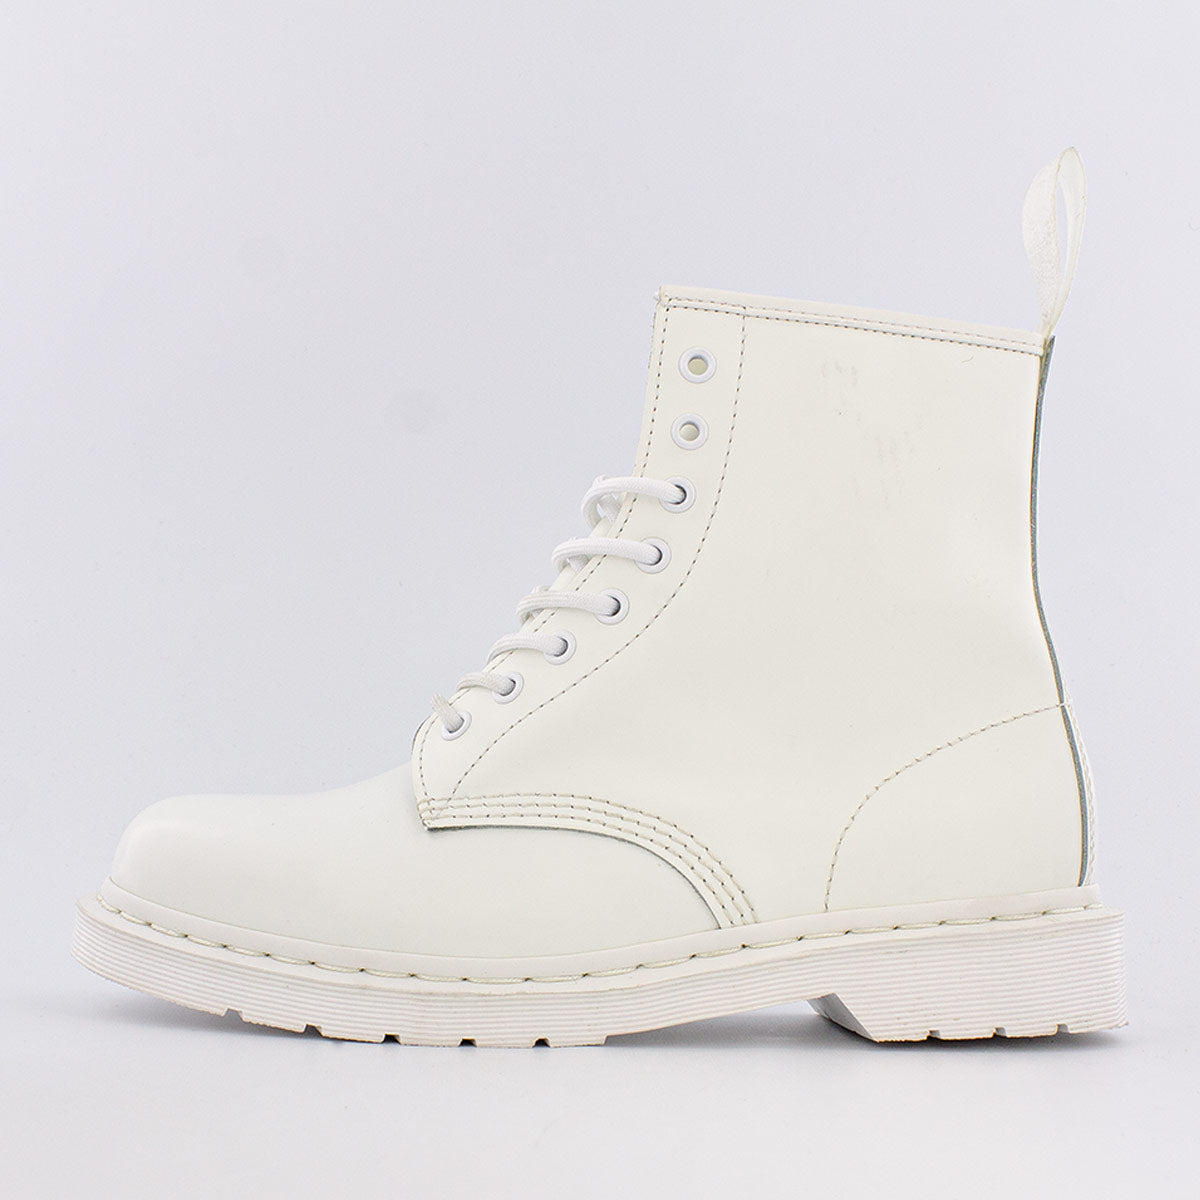 Dr. Martens 1460 Mono Smotth Leather Lace Up Boots